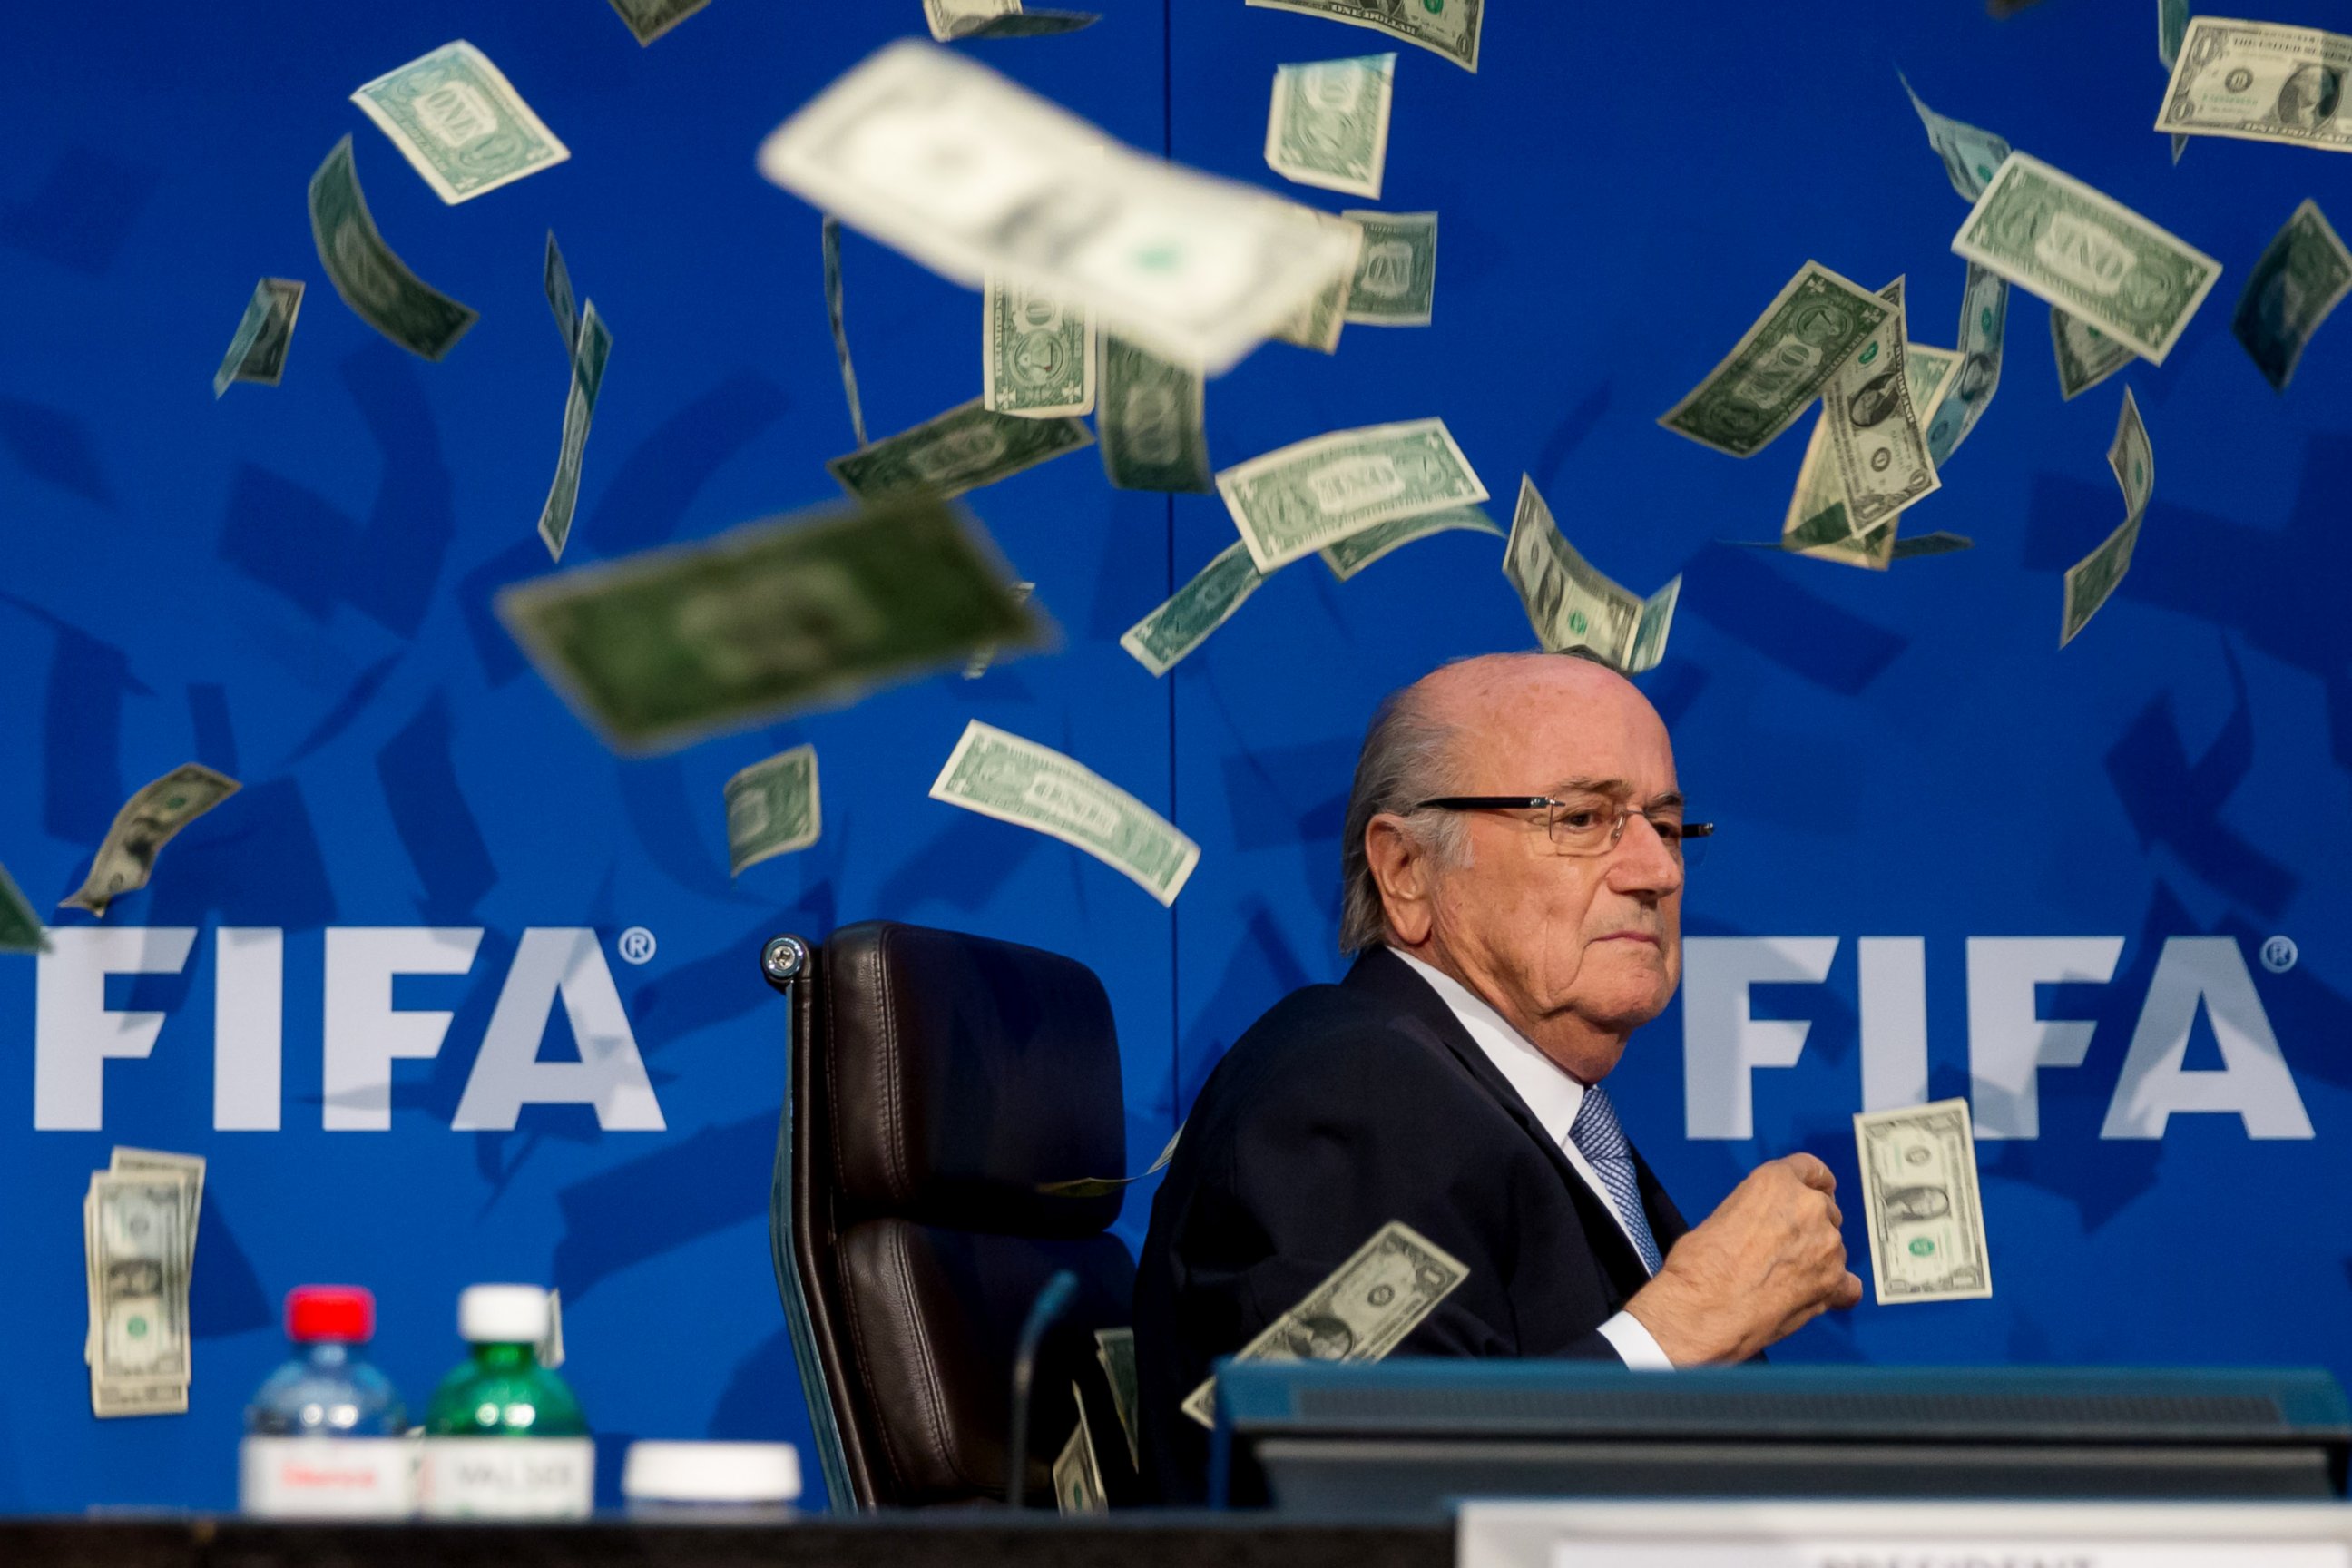 PHOTO: Comedian Simon Brodkin, not pictured, throws cash at FIFA President Joseph S. Blatter during a press conference at FIFA headquarters on July 20, 2015 in Zurich, Switzerland.